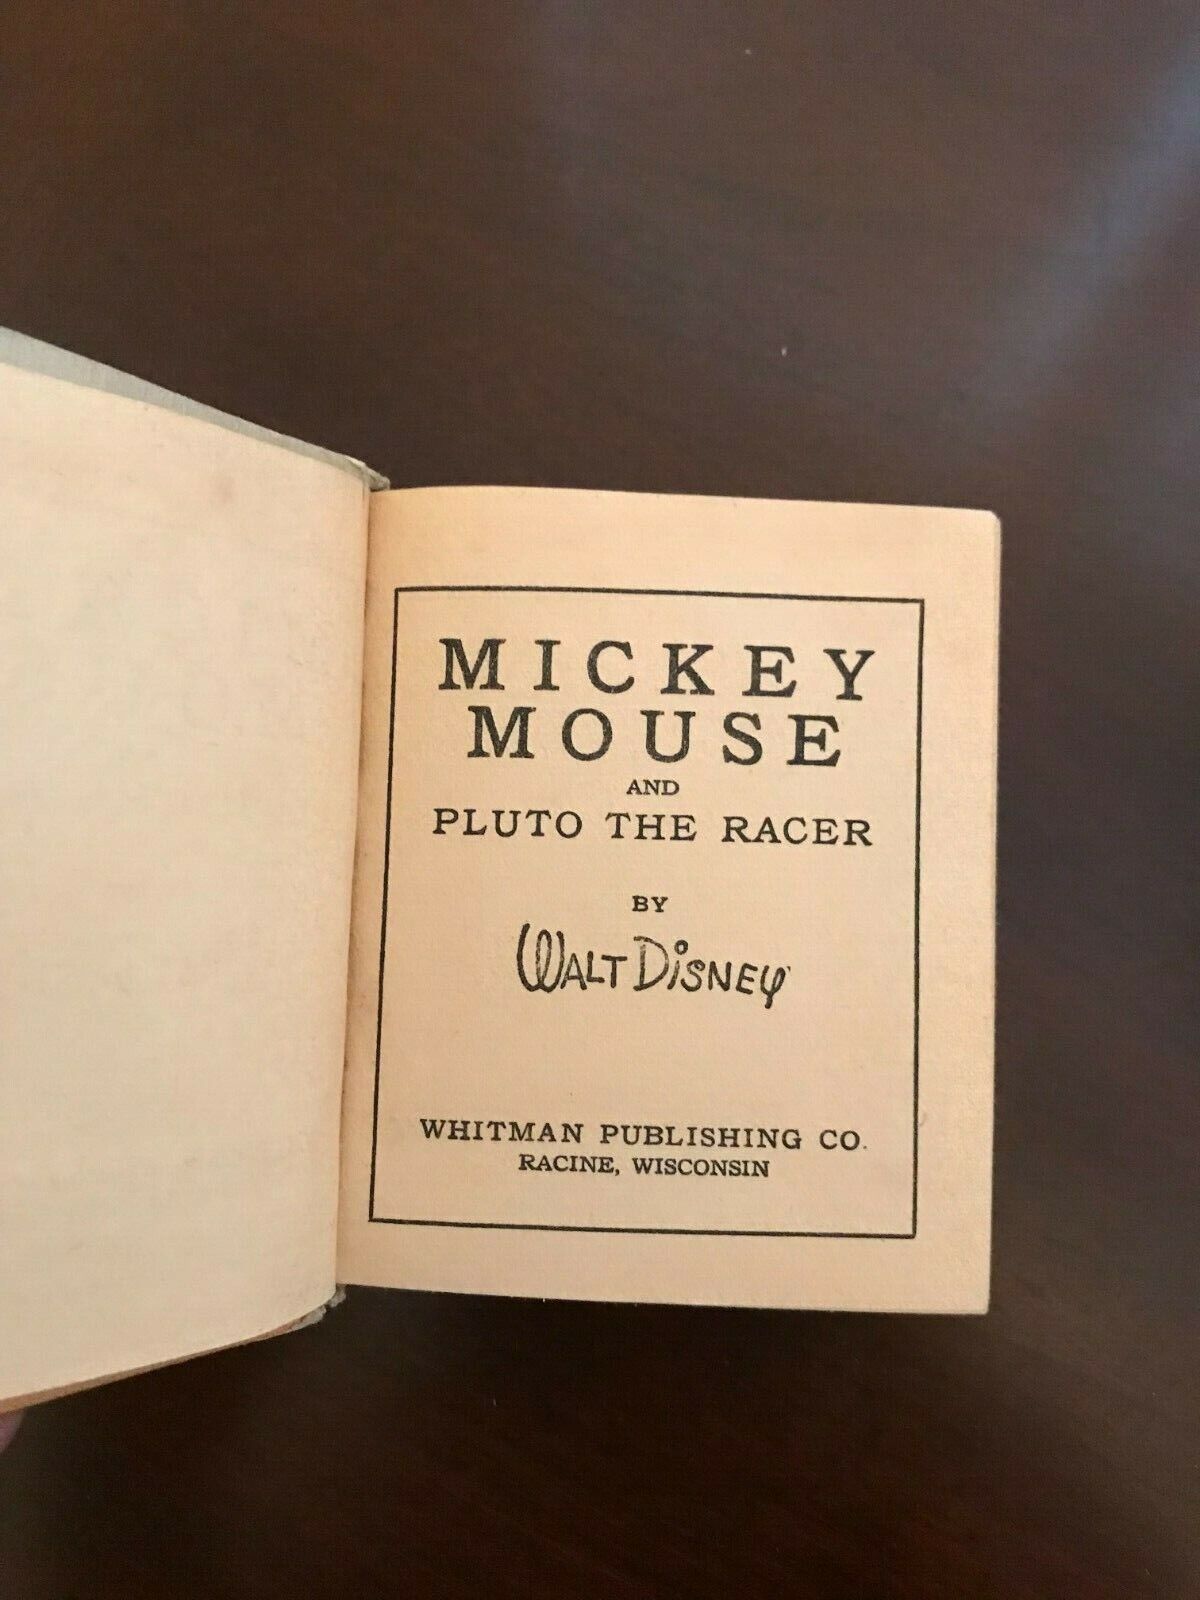 Disney vintage books - The Big Little Book featuring Mickey Mouse Без бренда - фотография #8